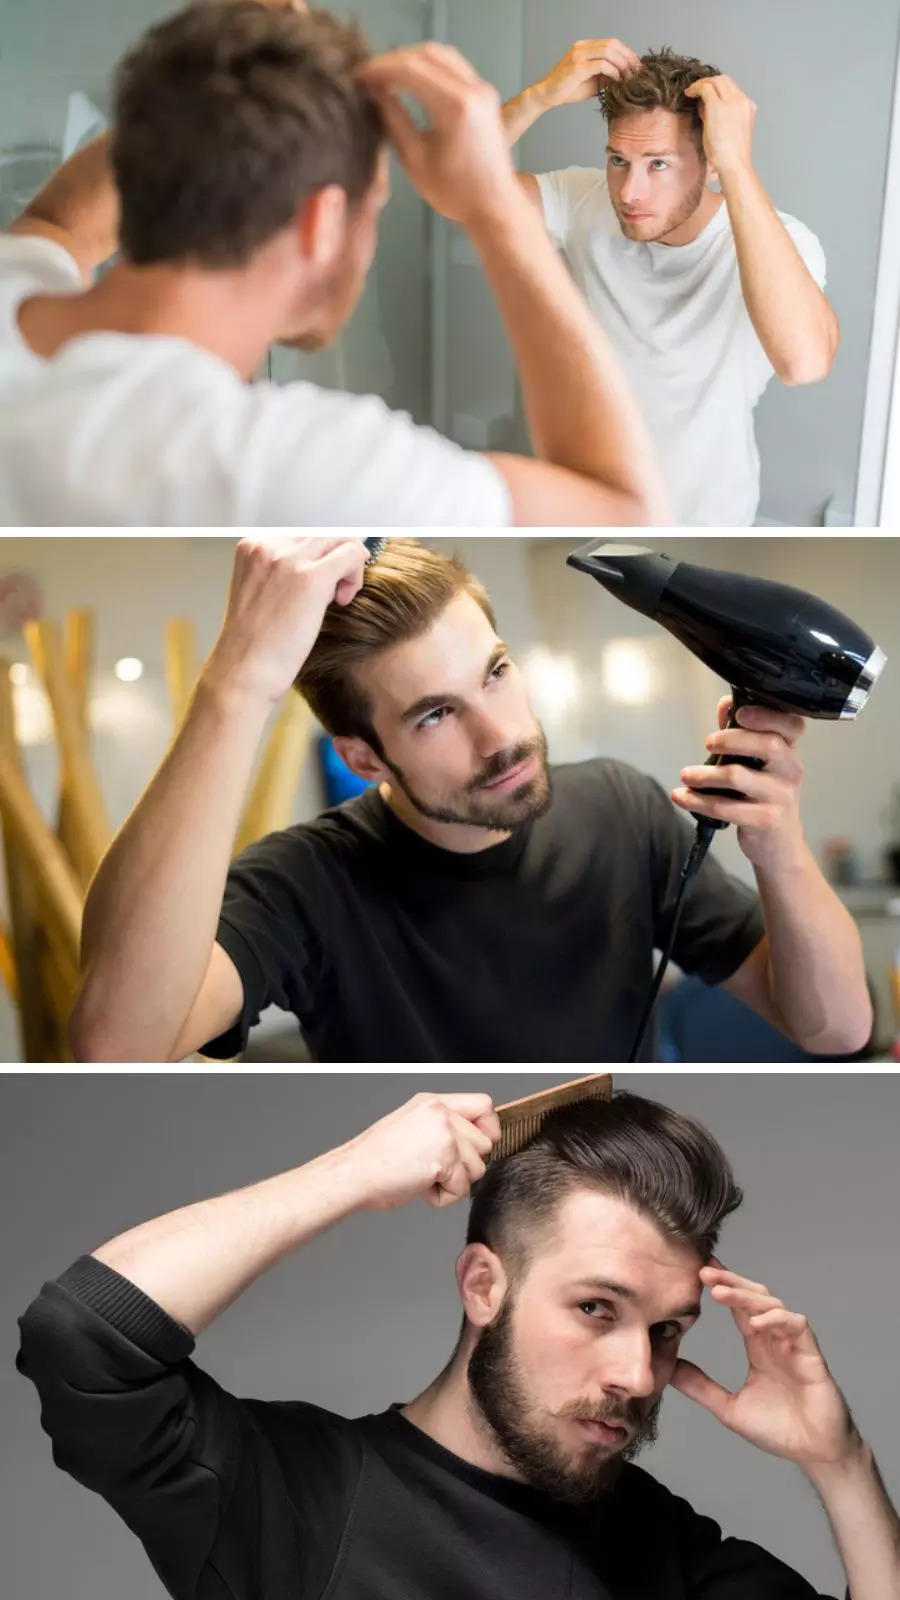 best hair care: Ditch Hair Dryer, Balanced Diet & DIY conditioners: Best  Hair Care Routine For Men | EconomicTimes